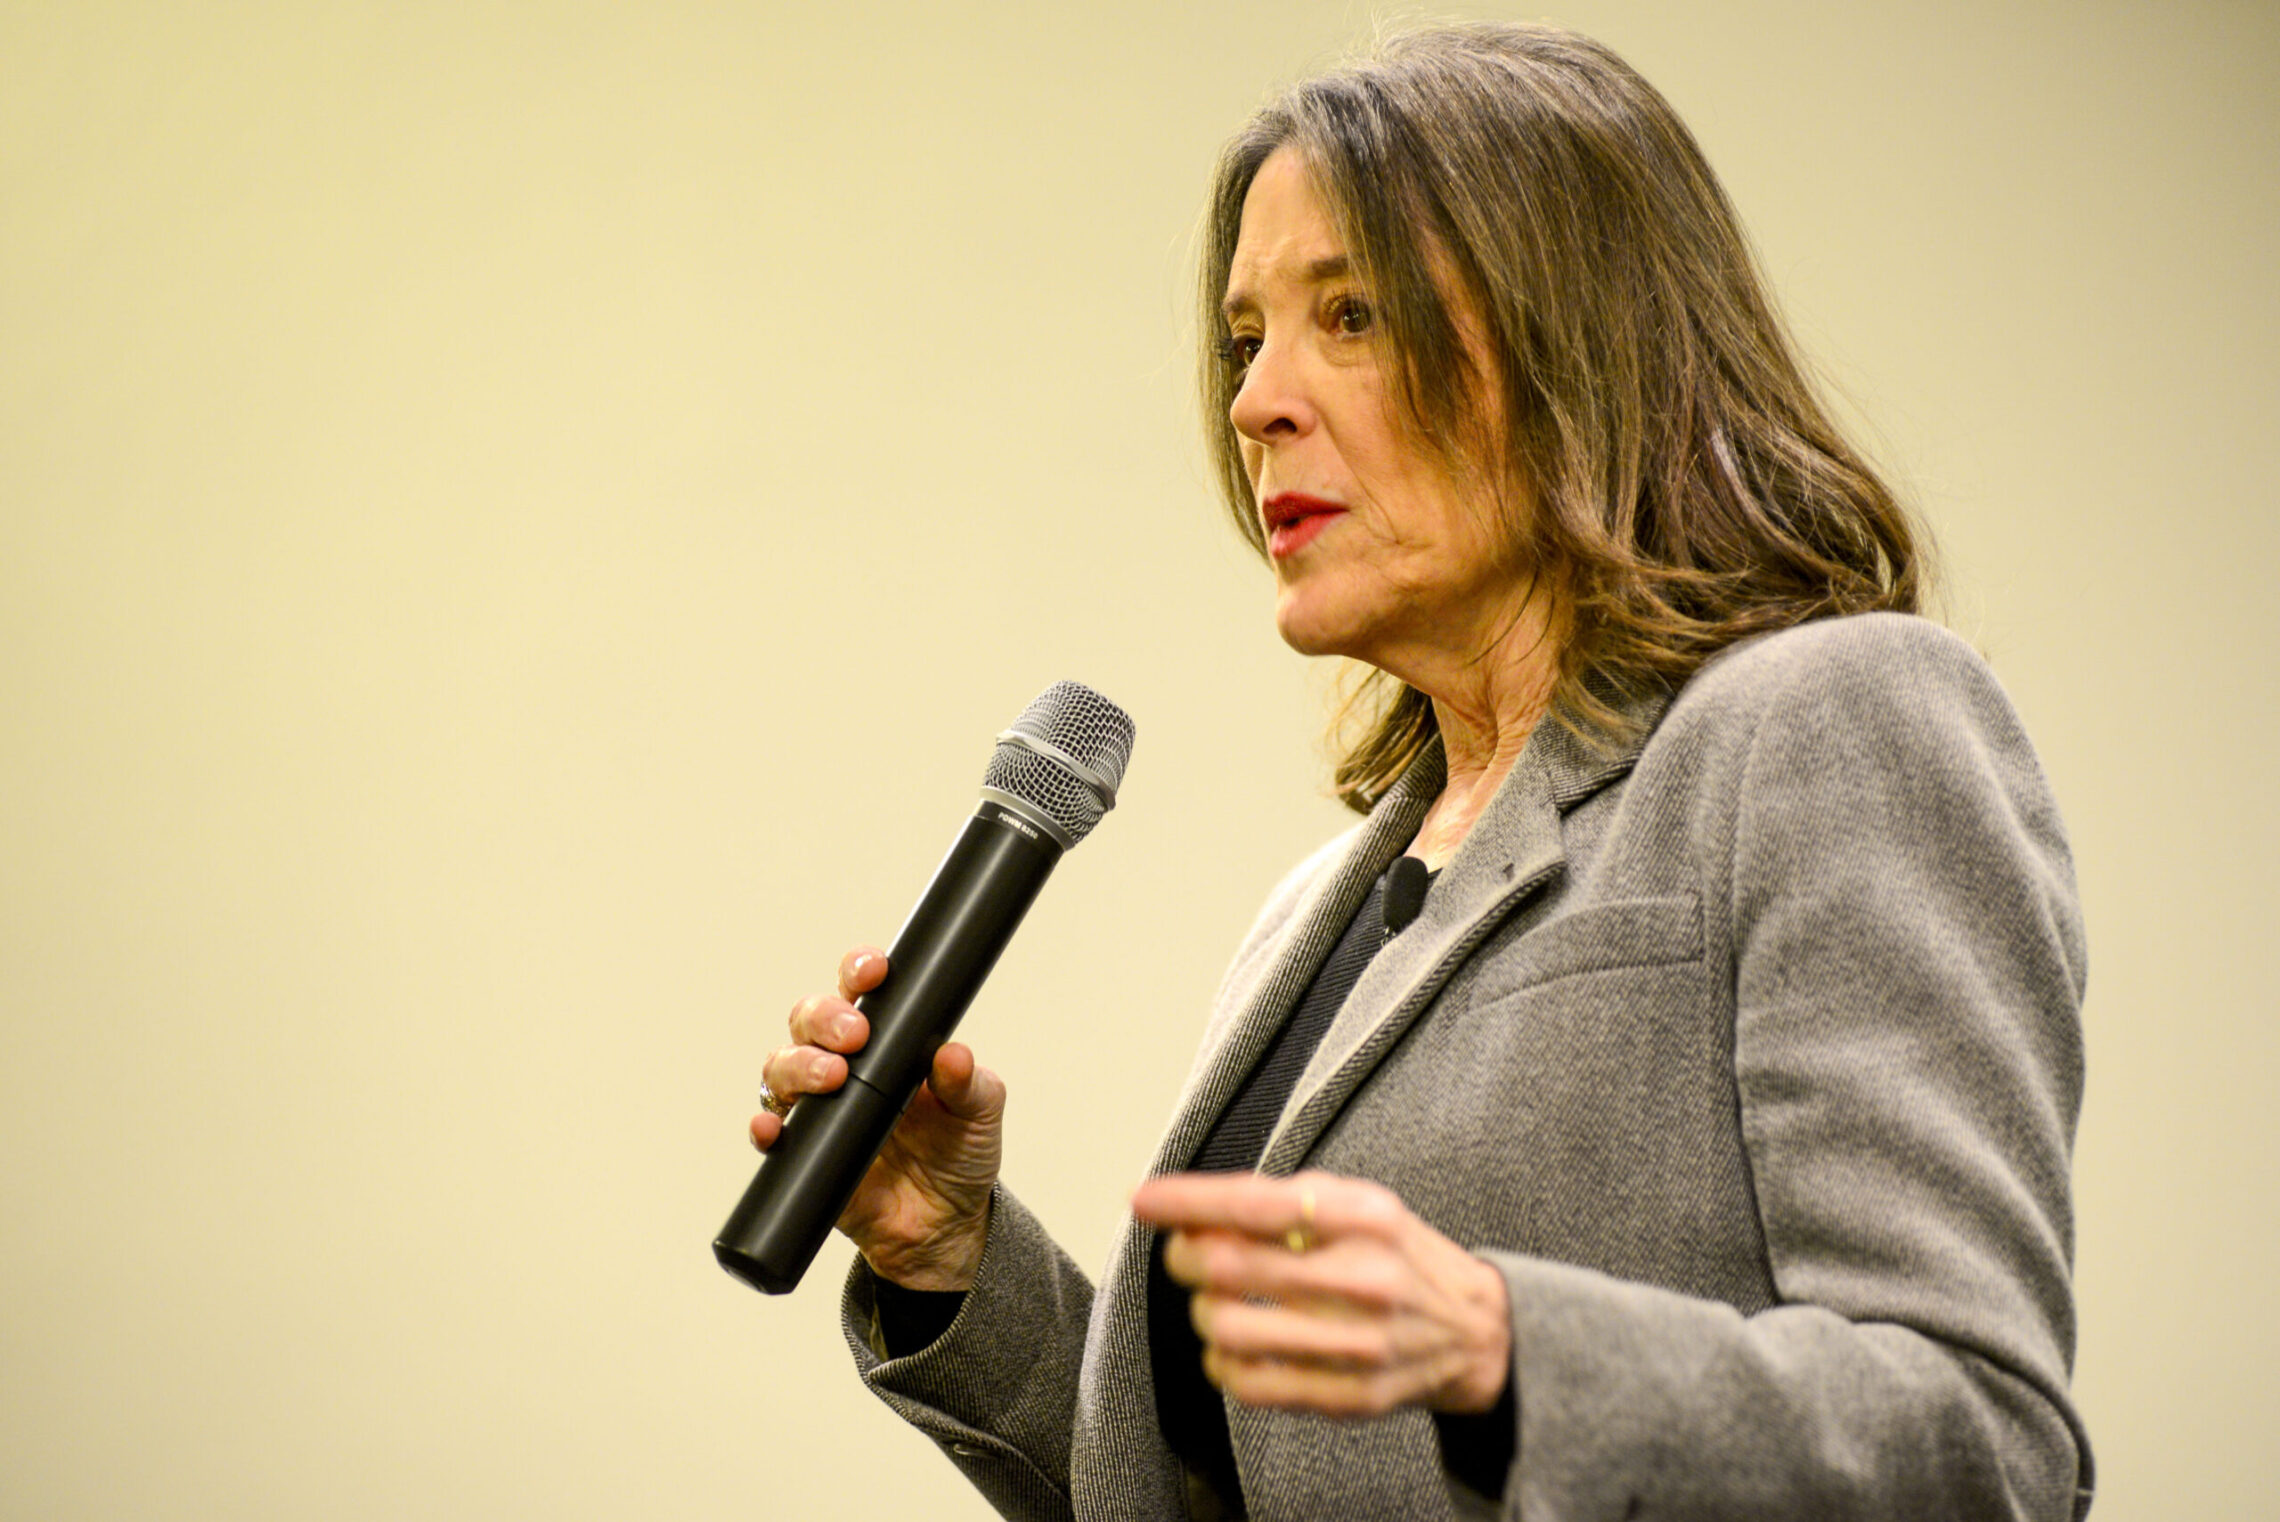 Still running Marianne Williamson denies rumors she is dropping out of